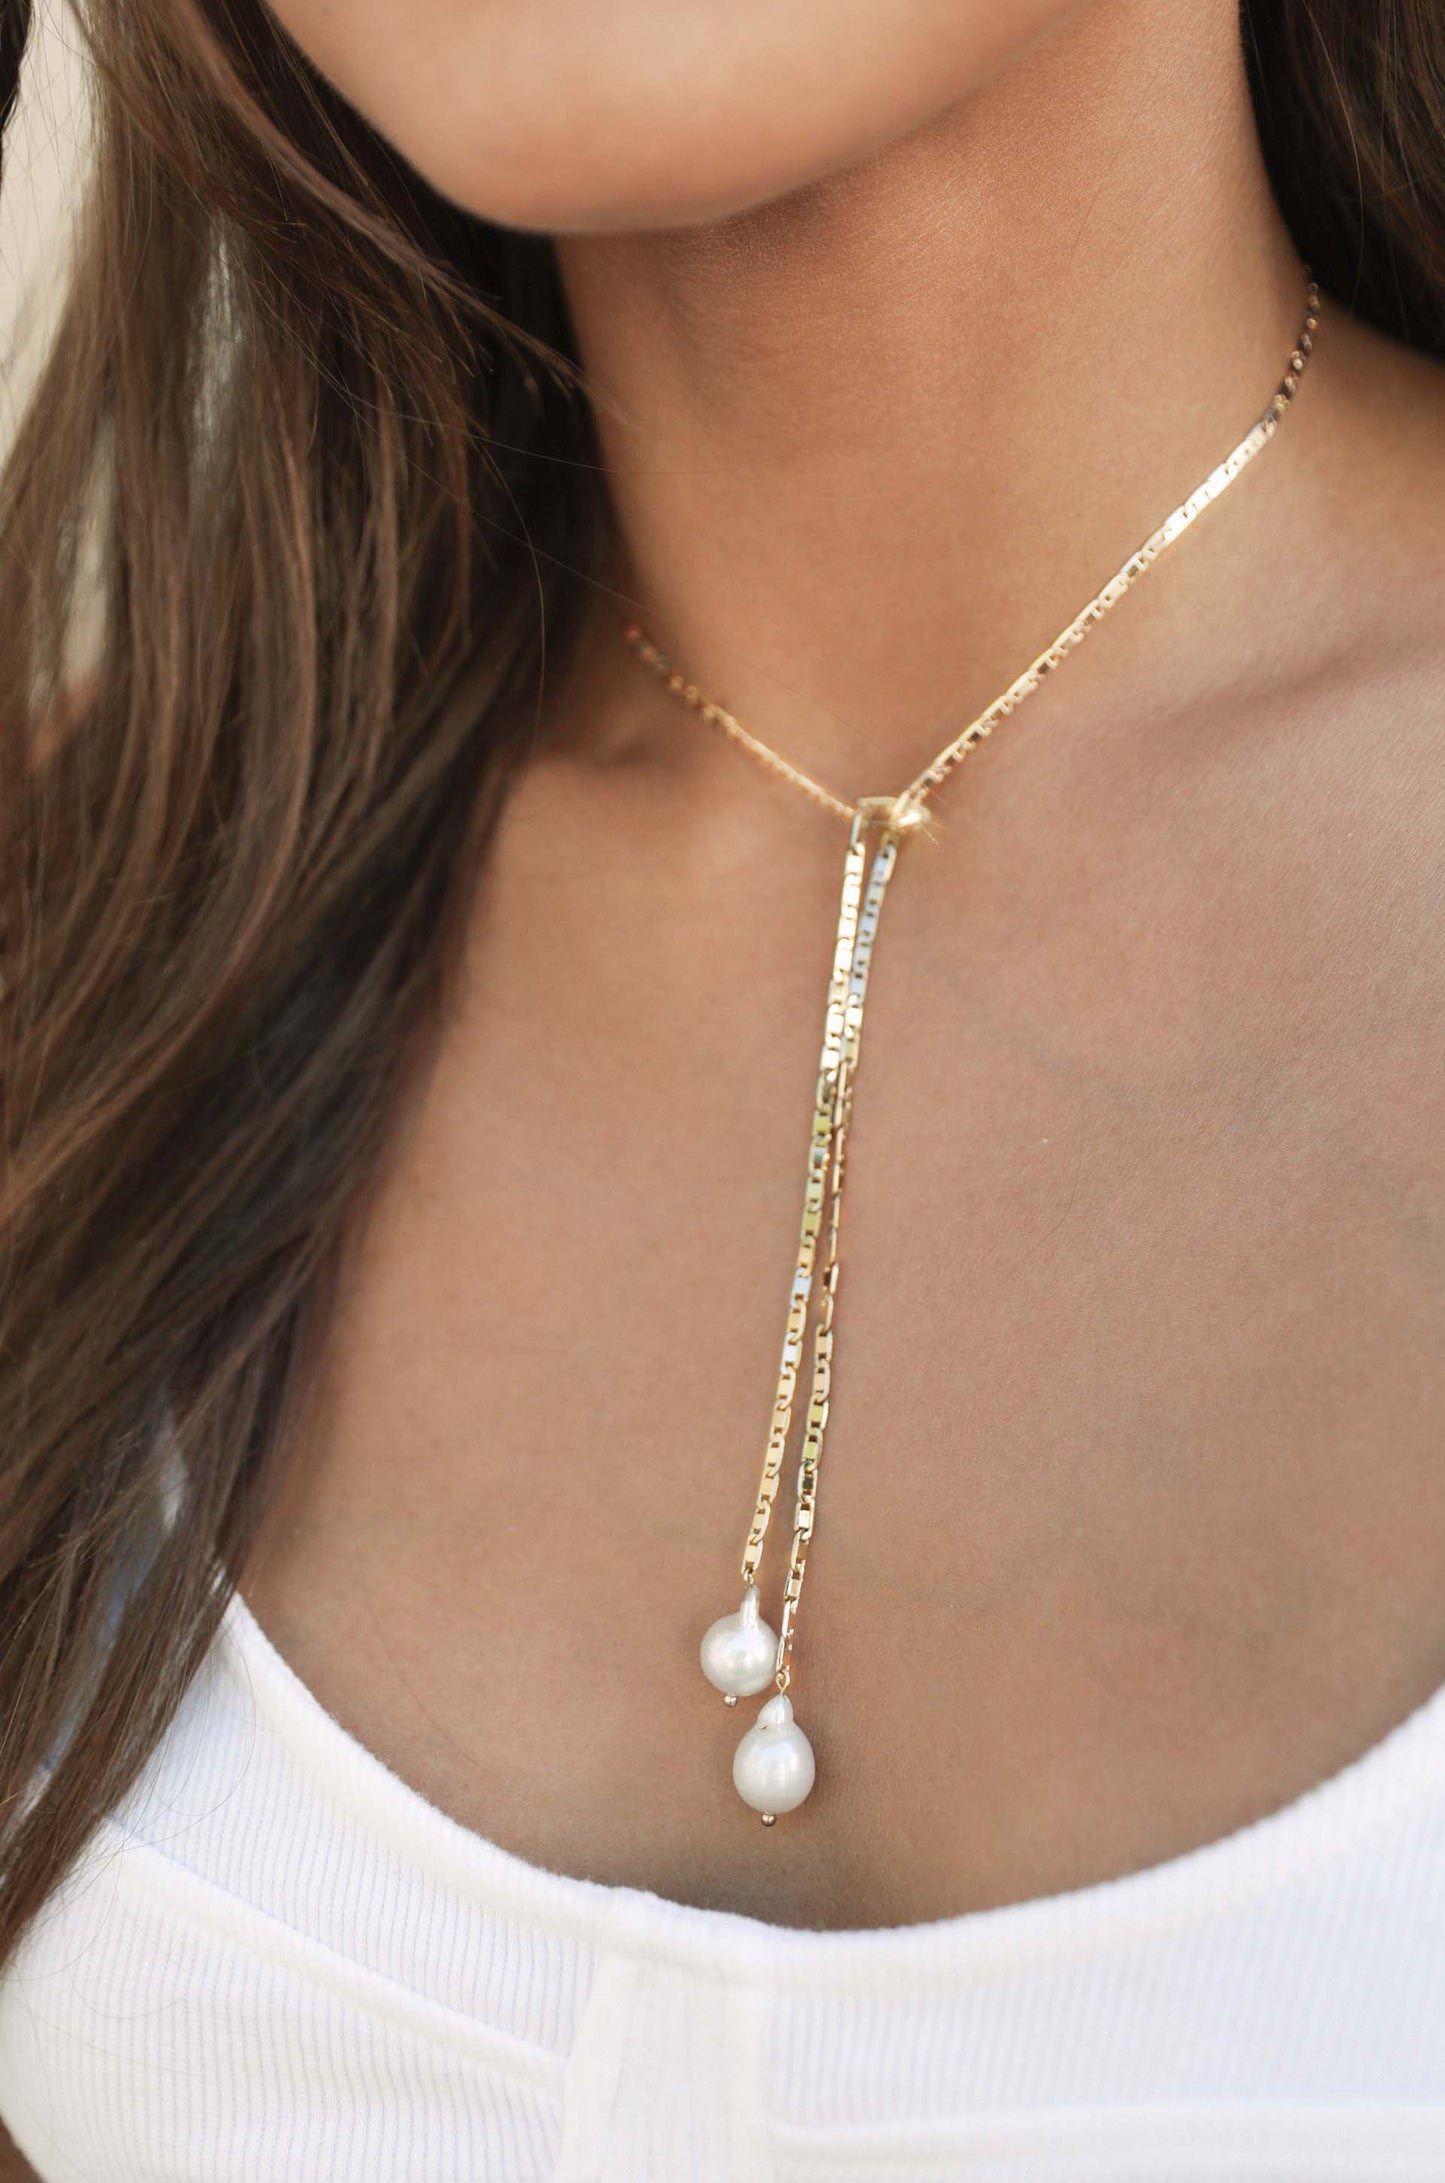 Minimalist Freshwater Pearl Bolo Lariat Necklace on model